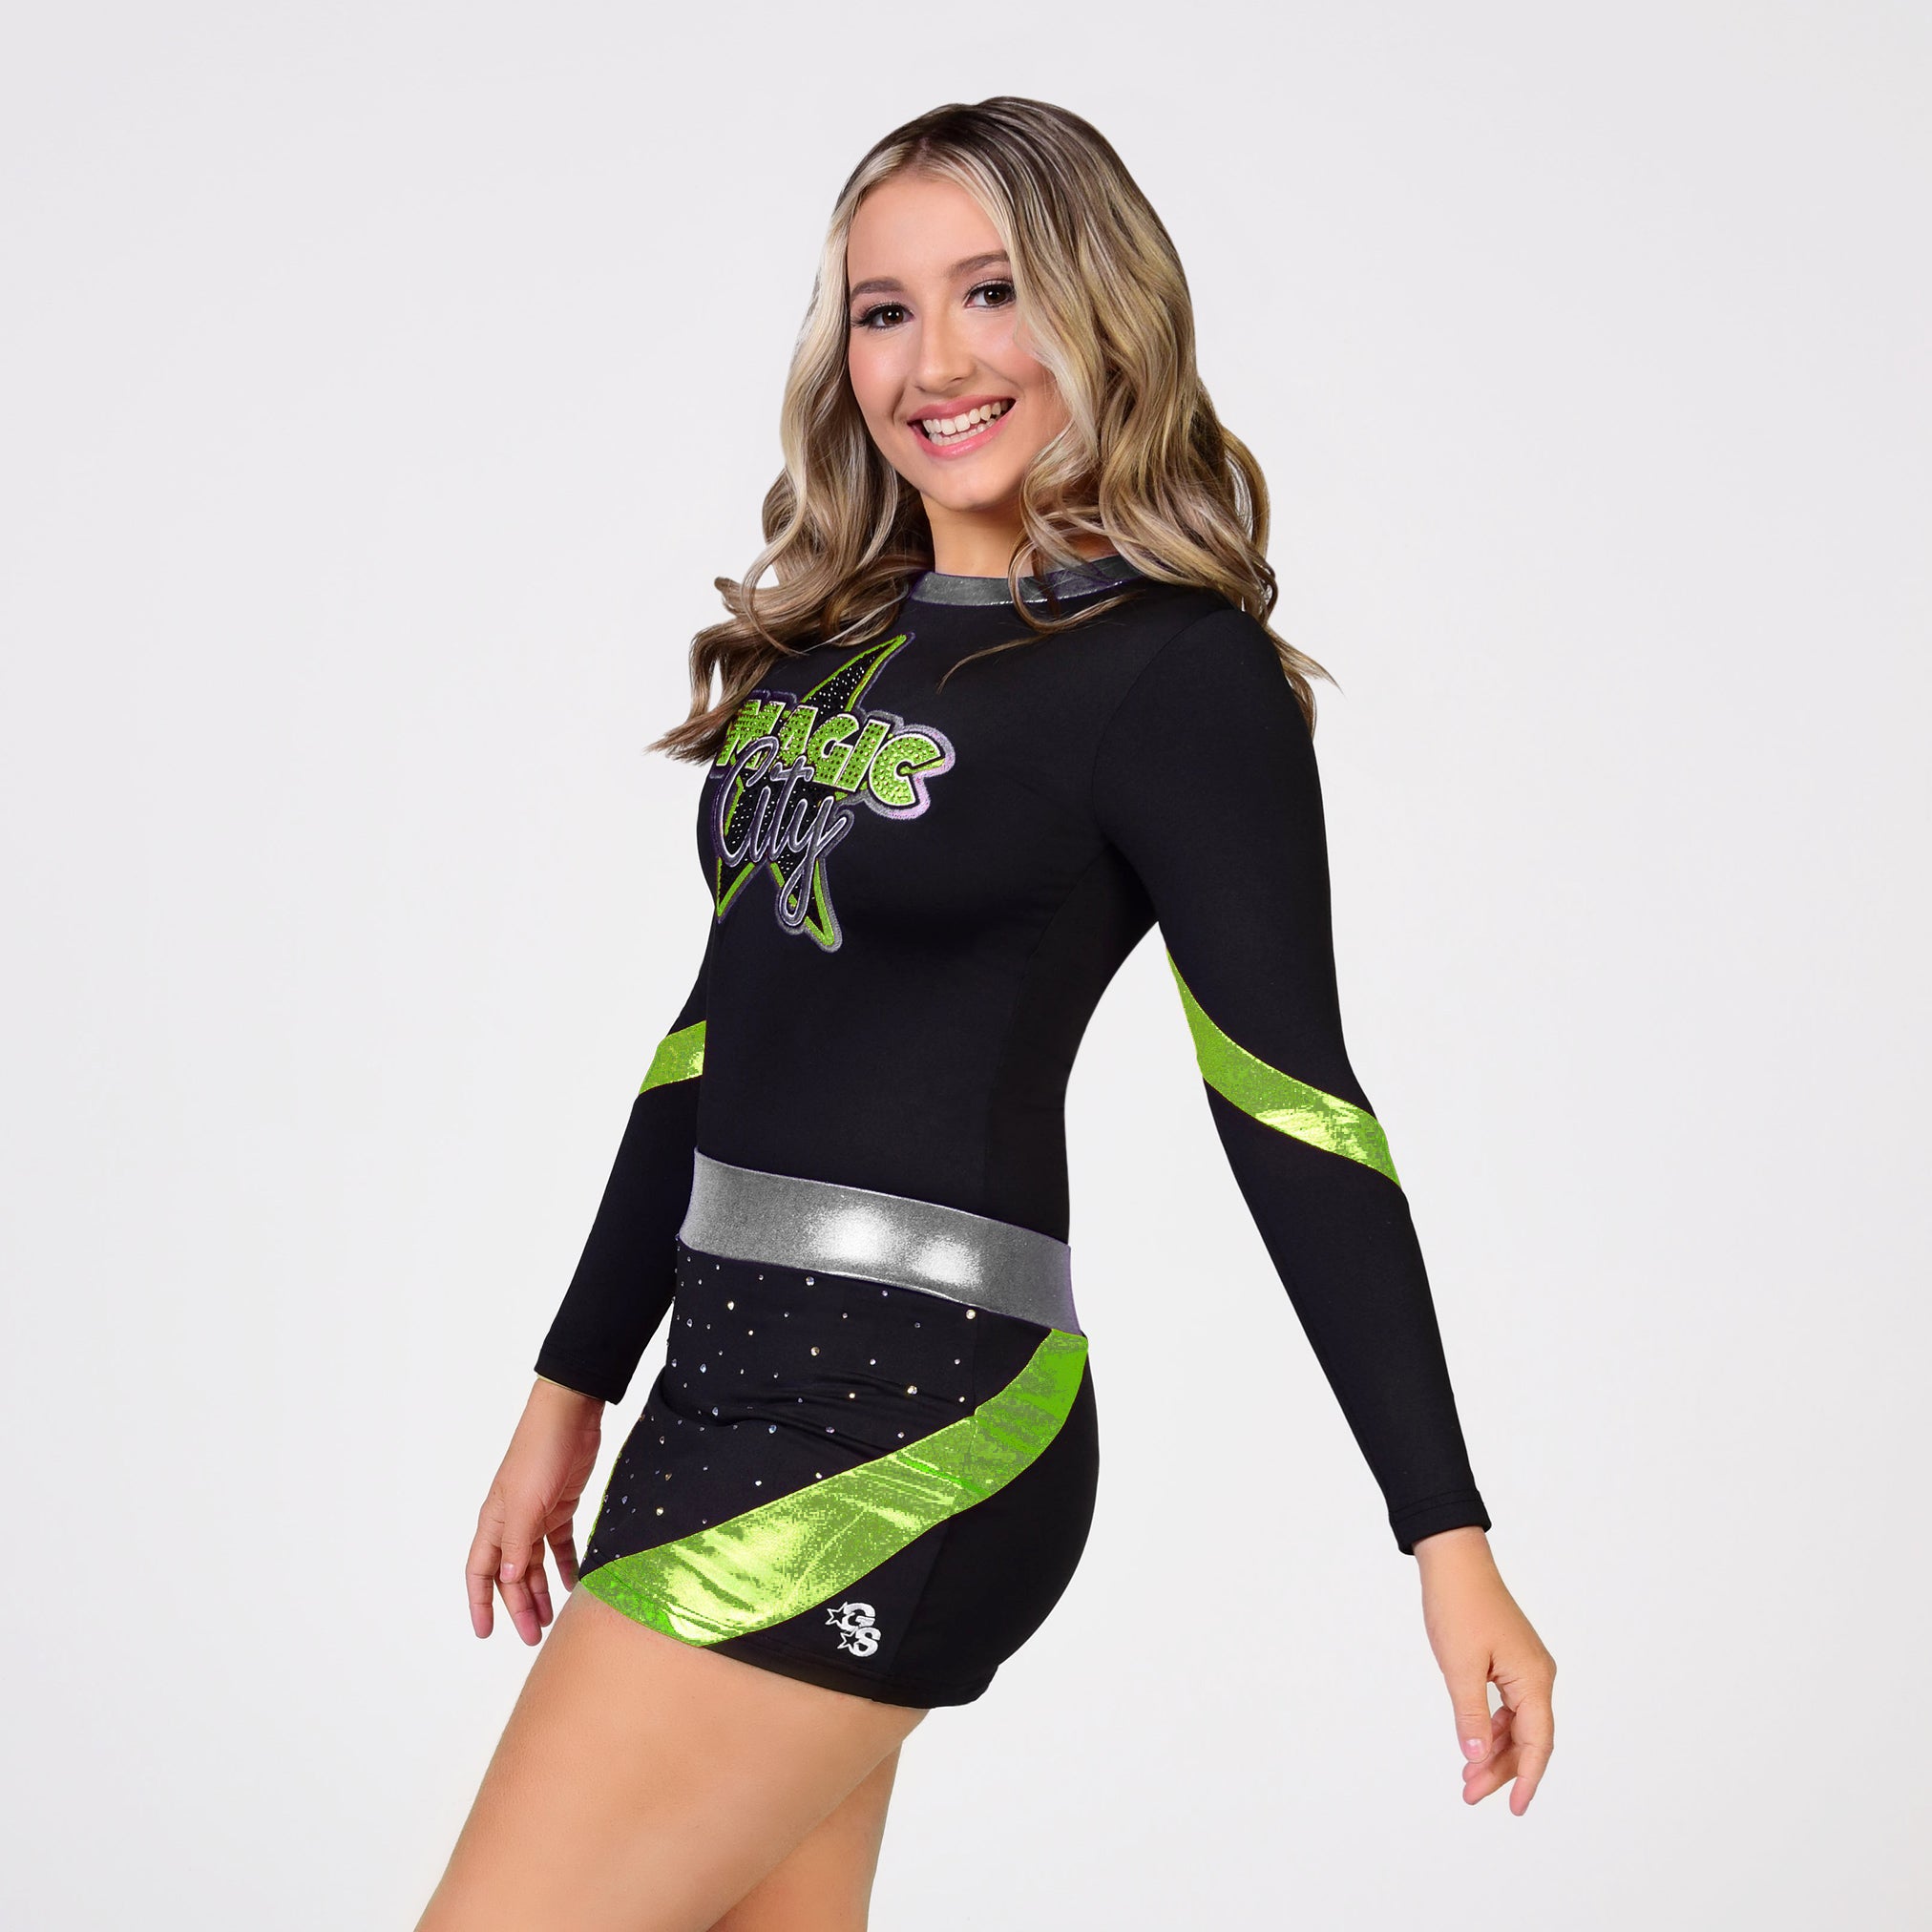 Crossover Uniform with Closed Back - Lime green